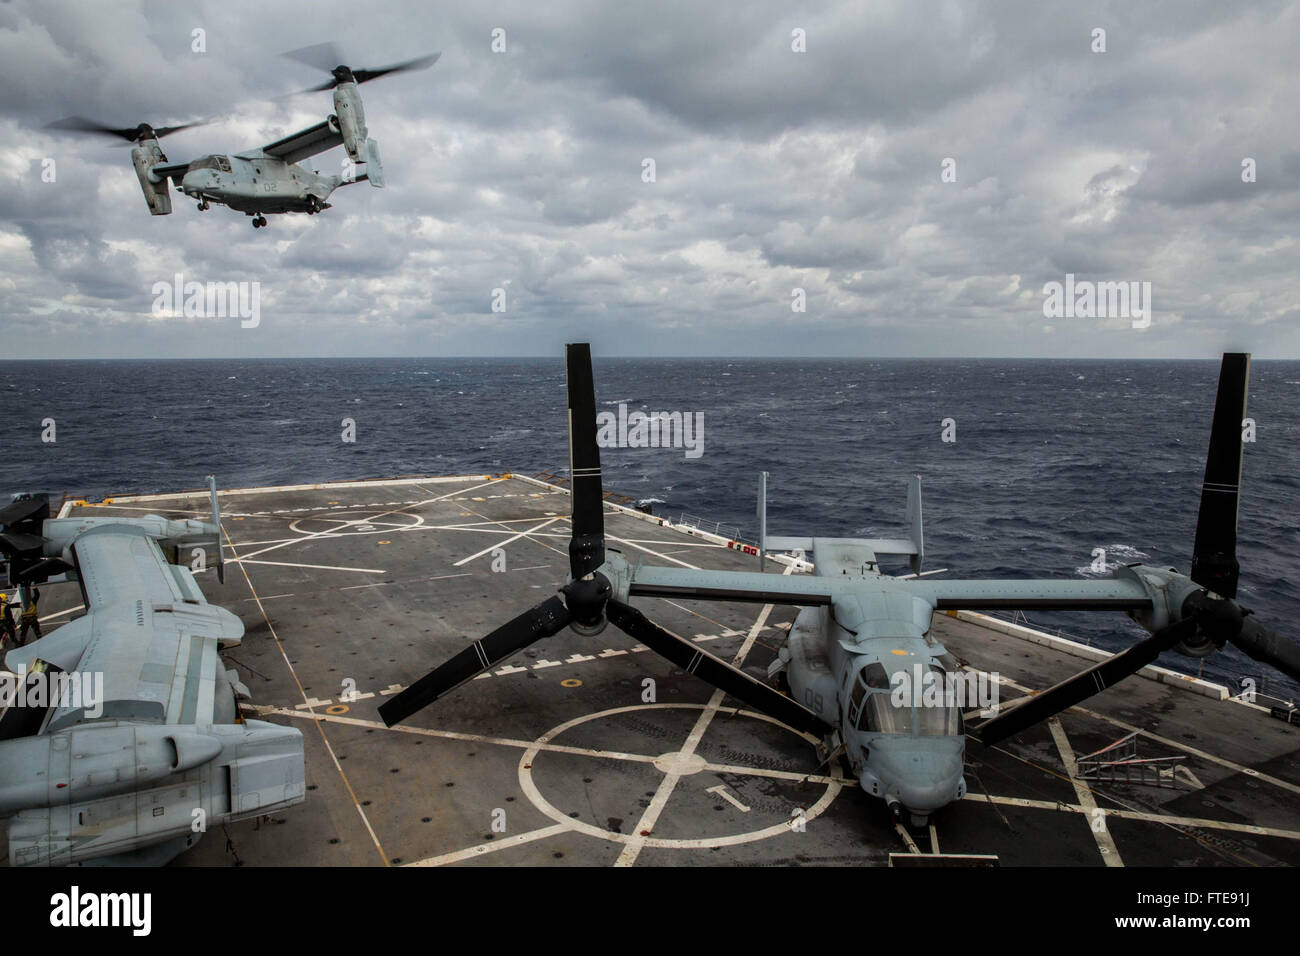 150105-M-YH418-002 MEDITERRANEAN SEA (Jan. 5, 2015) An MV-22B Osprey, assigned to Marine Medium Tiltrotor Squadron 365 (Reinforced), 24th Marine Expeditionary Unit, takes off from the flight deck aboard USS New York (LPD 21), Jan. 5, 2015. The 24th MEU and Iwo Jima Amphibious Ready Group are conducting naval operations in the U.S. 6th Fleet area of operations in support of U.S. national security interests in Europe. (U.S. Marine Corps photo by Cpl. Todd F. Michalek/Released) Stock Photo